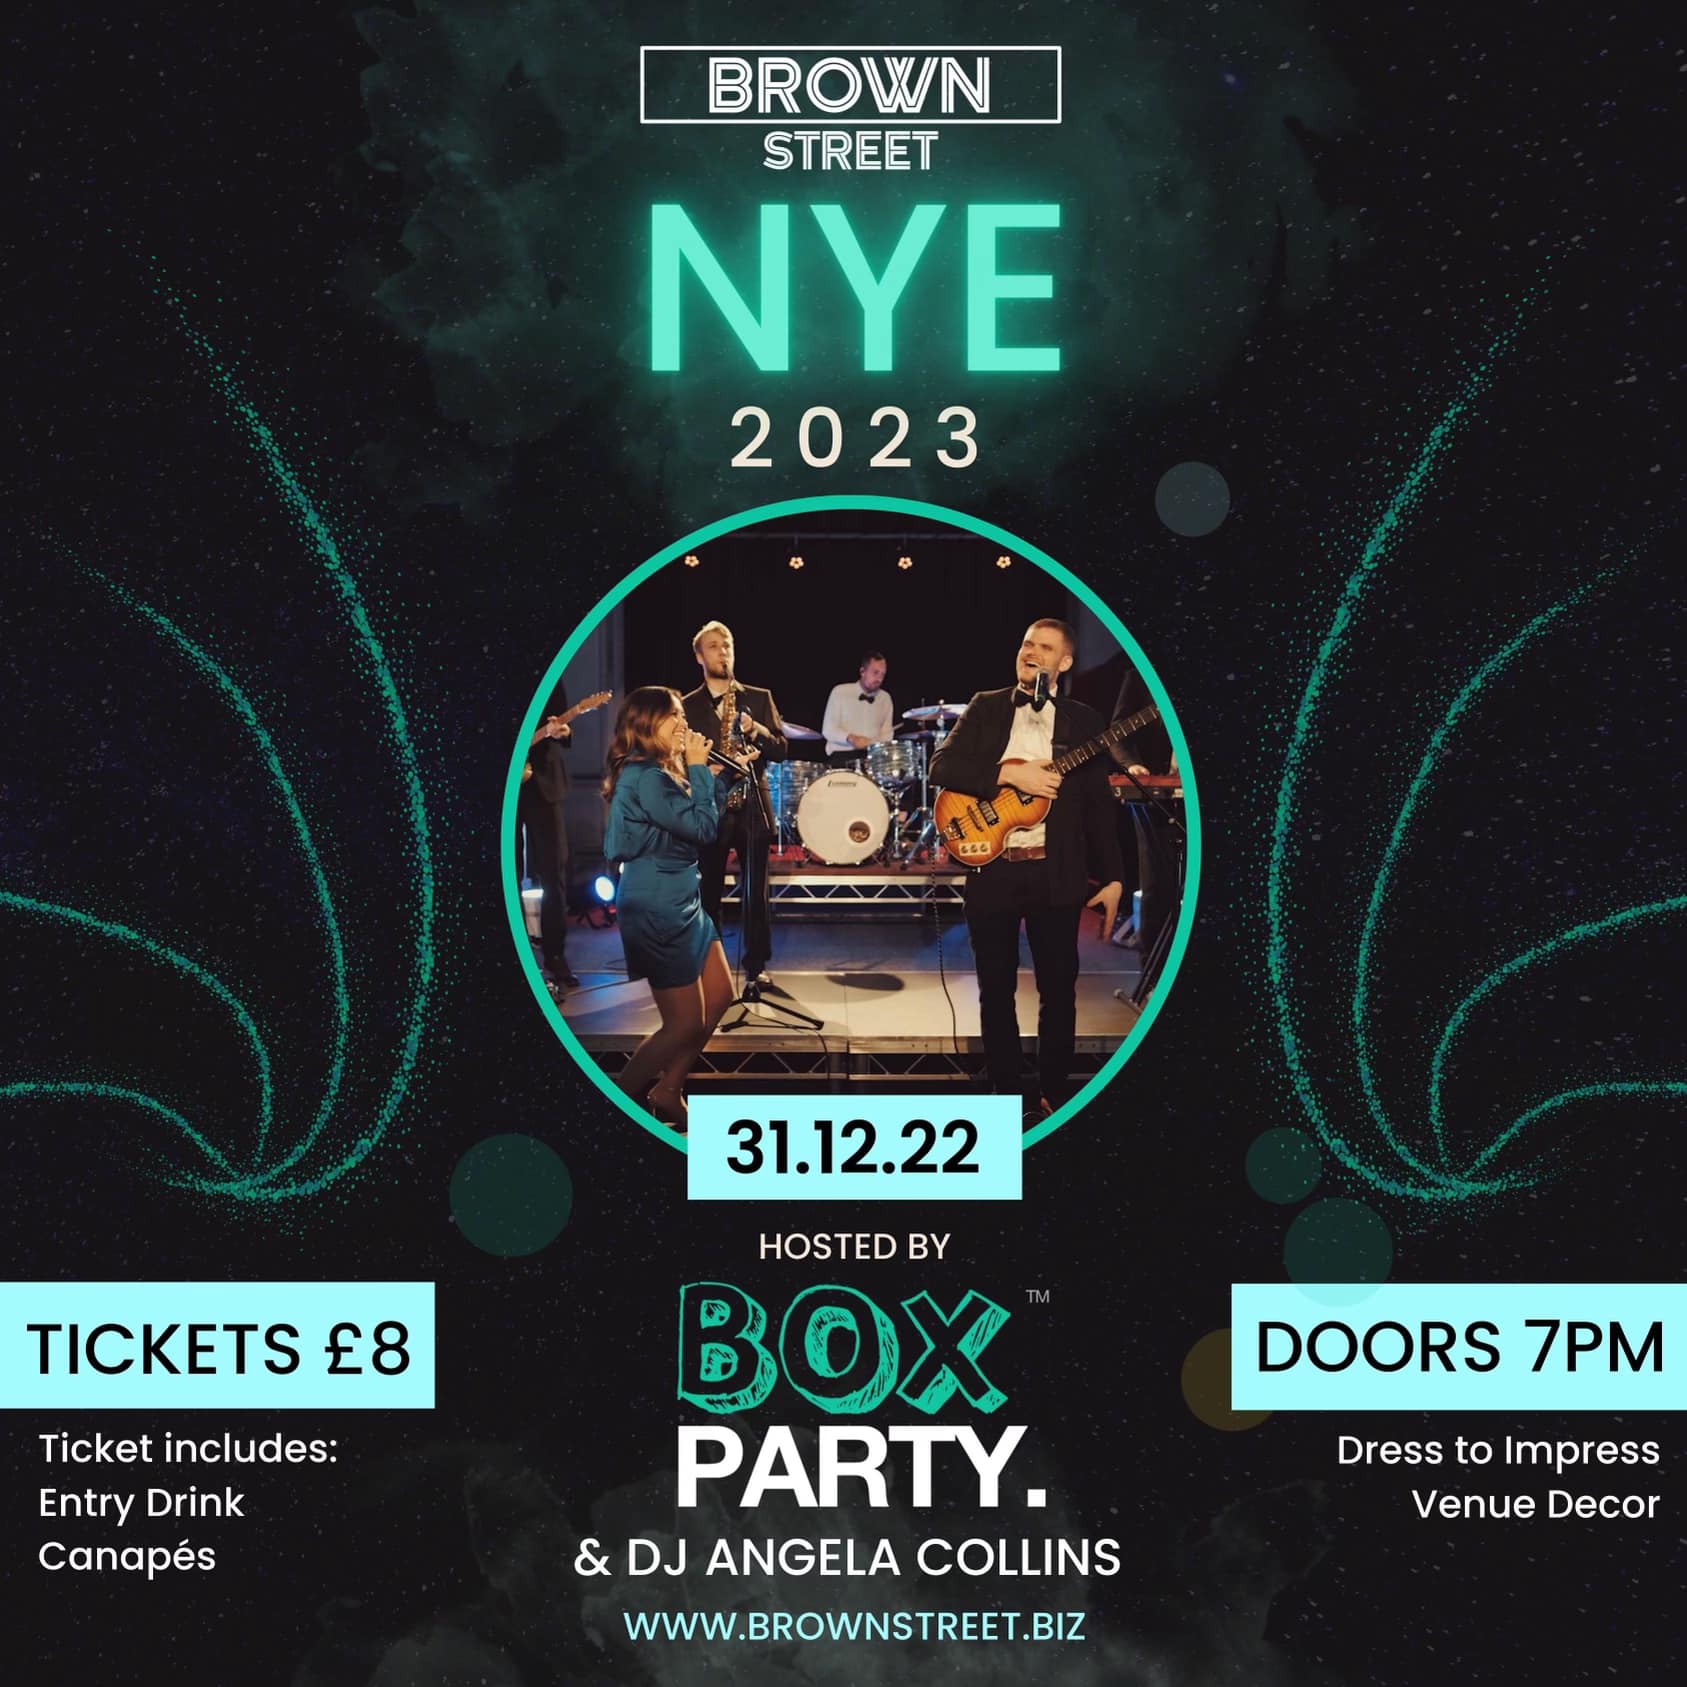 New Years Eve: BOX PARTY